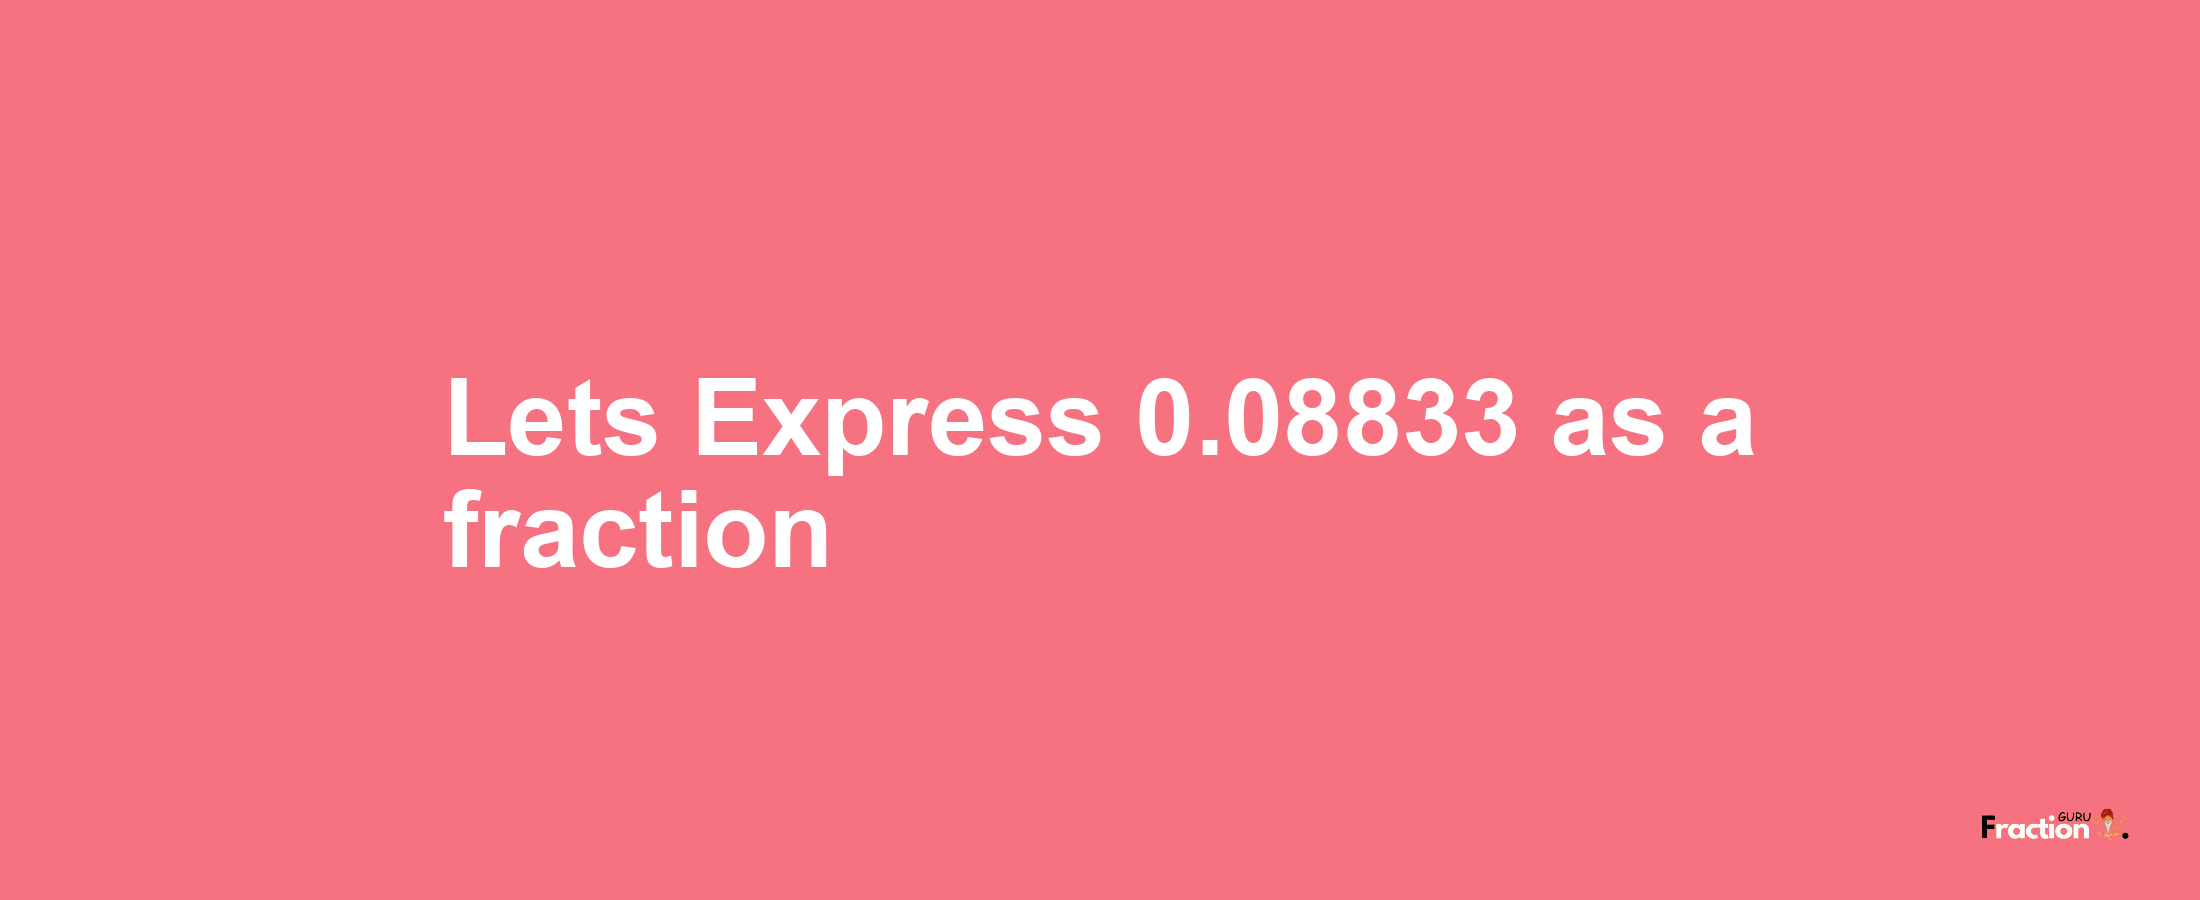 Lets Express 0.08833 as afraction